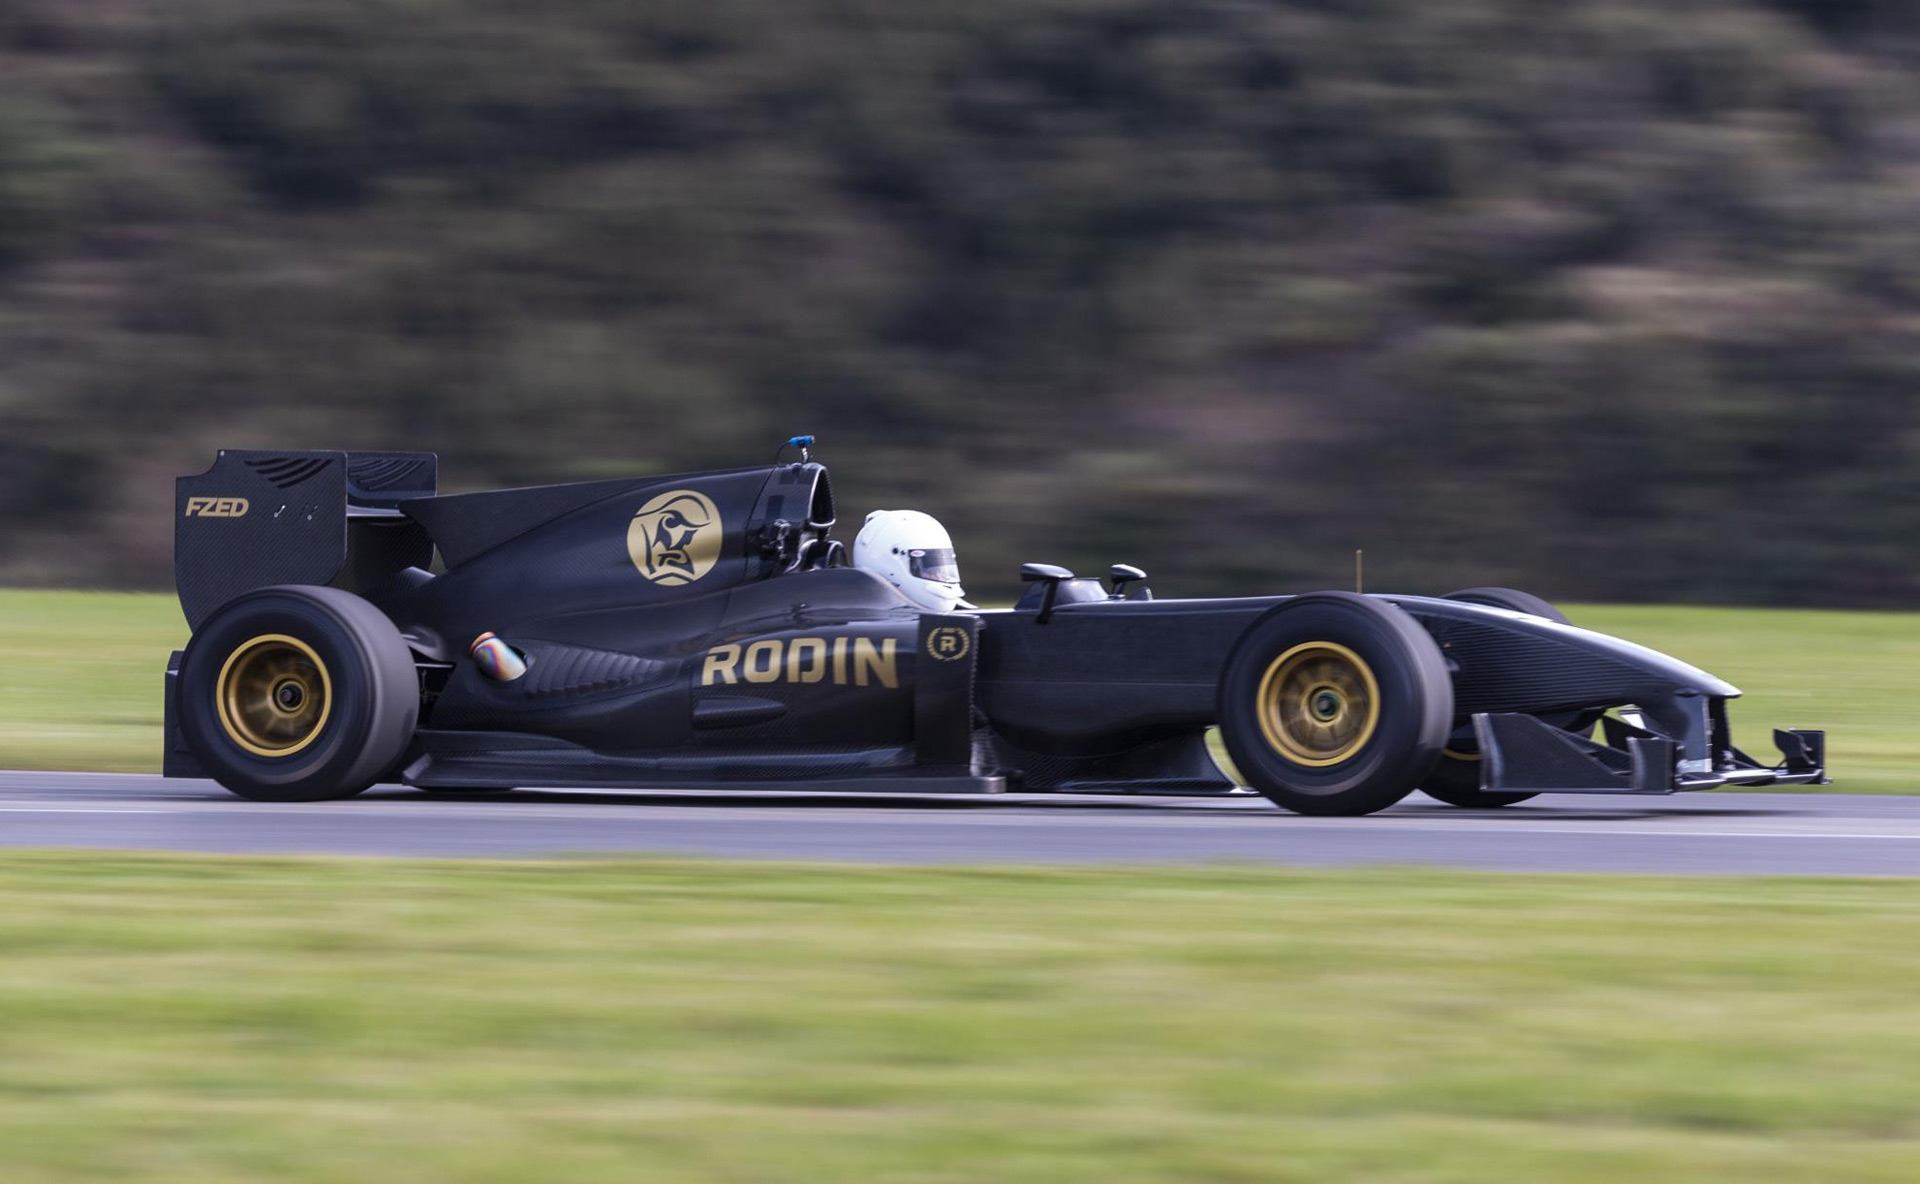 New Zealand's Rodin reveals it applied for an F1 entry